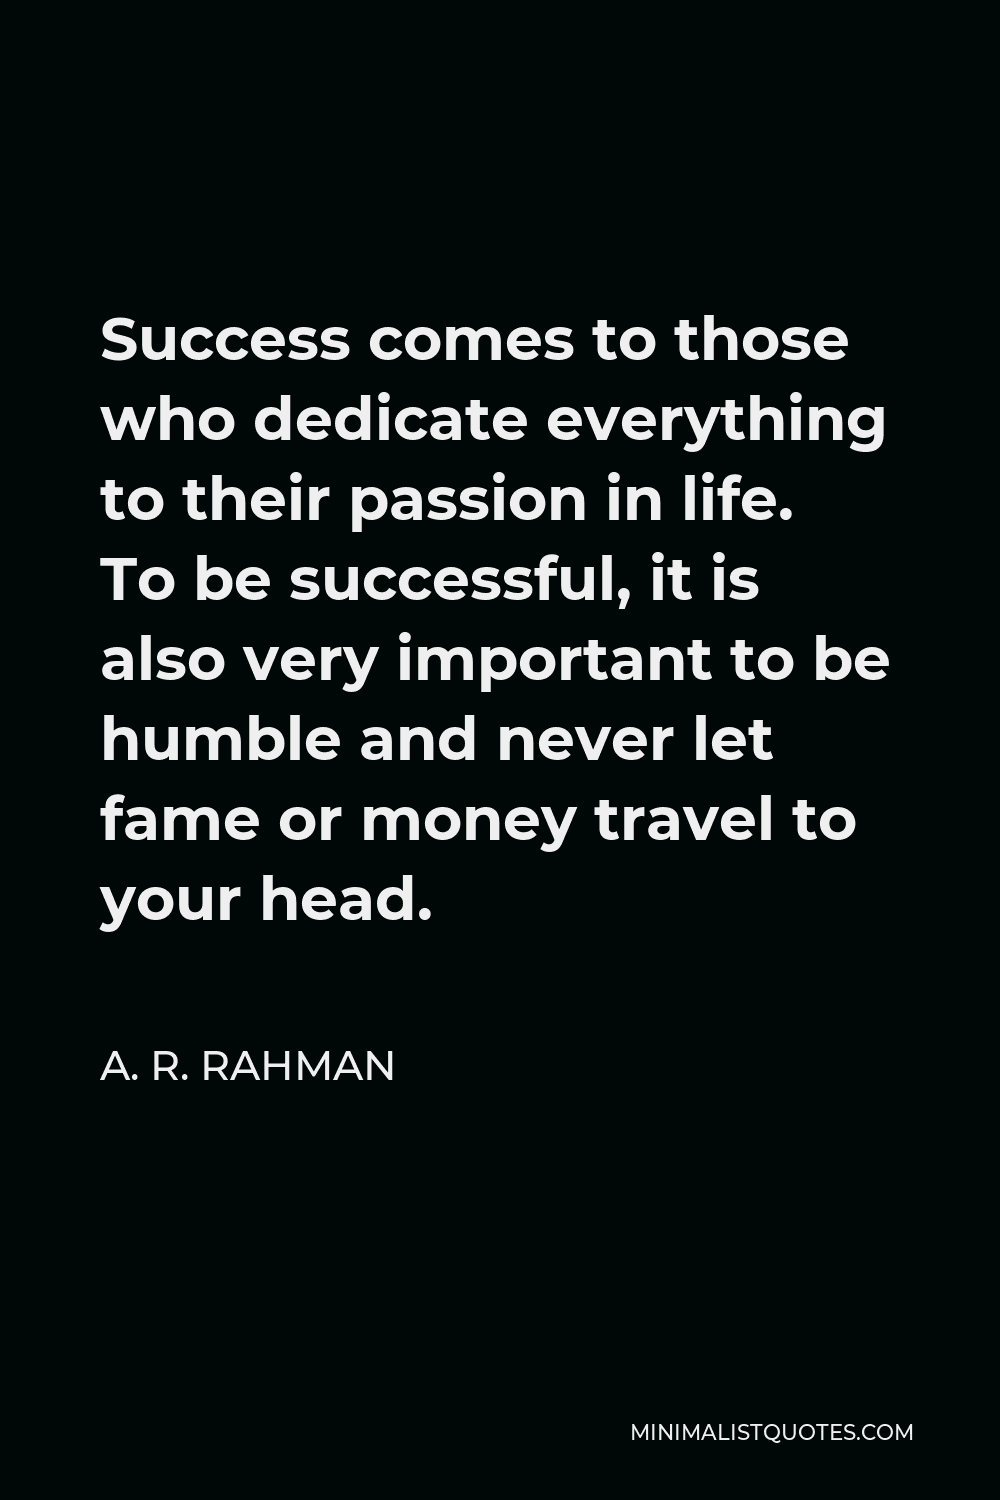 A. R. Rahman Quote - Success comes to those who dedicate everything to their passion in life. To be successful, it is also very important to be humble and never let fame or money travel to your head.